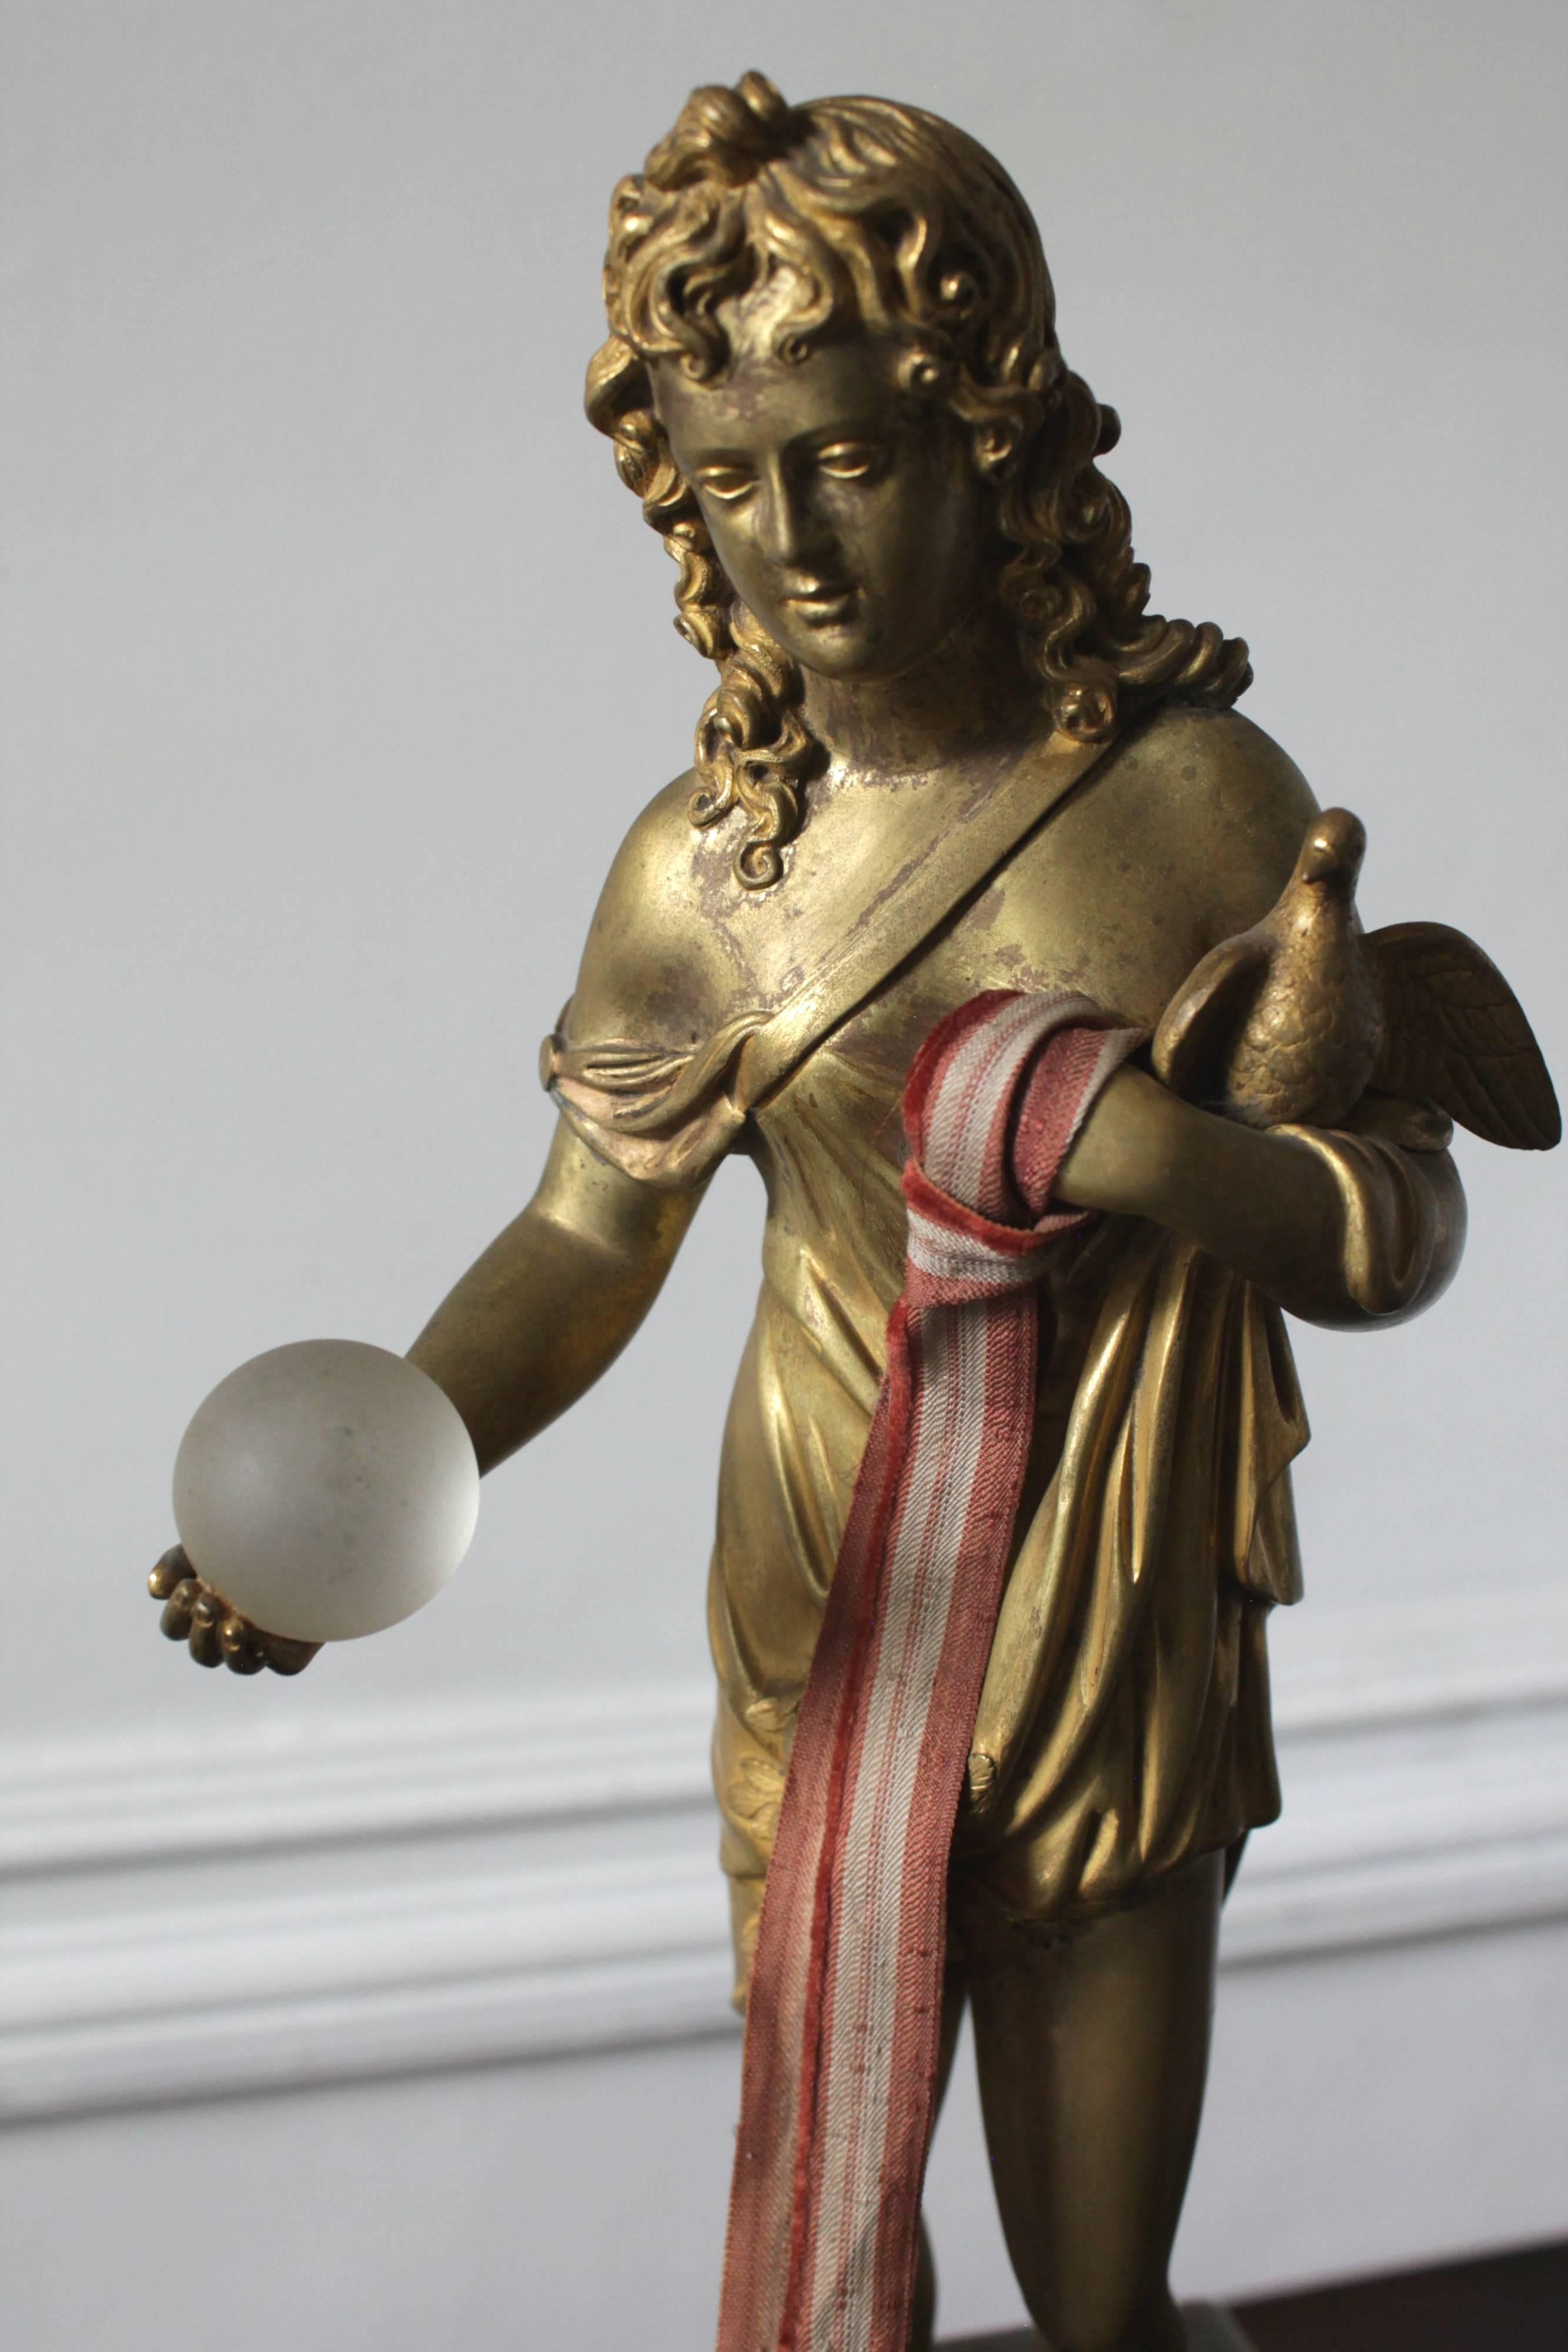 French bronze sculpture from the 19th century, intervened with a glass sphere and Genoese velvet dating from the 18th century.

One of a kind piece.